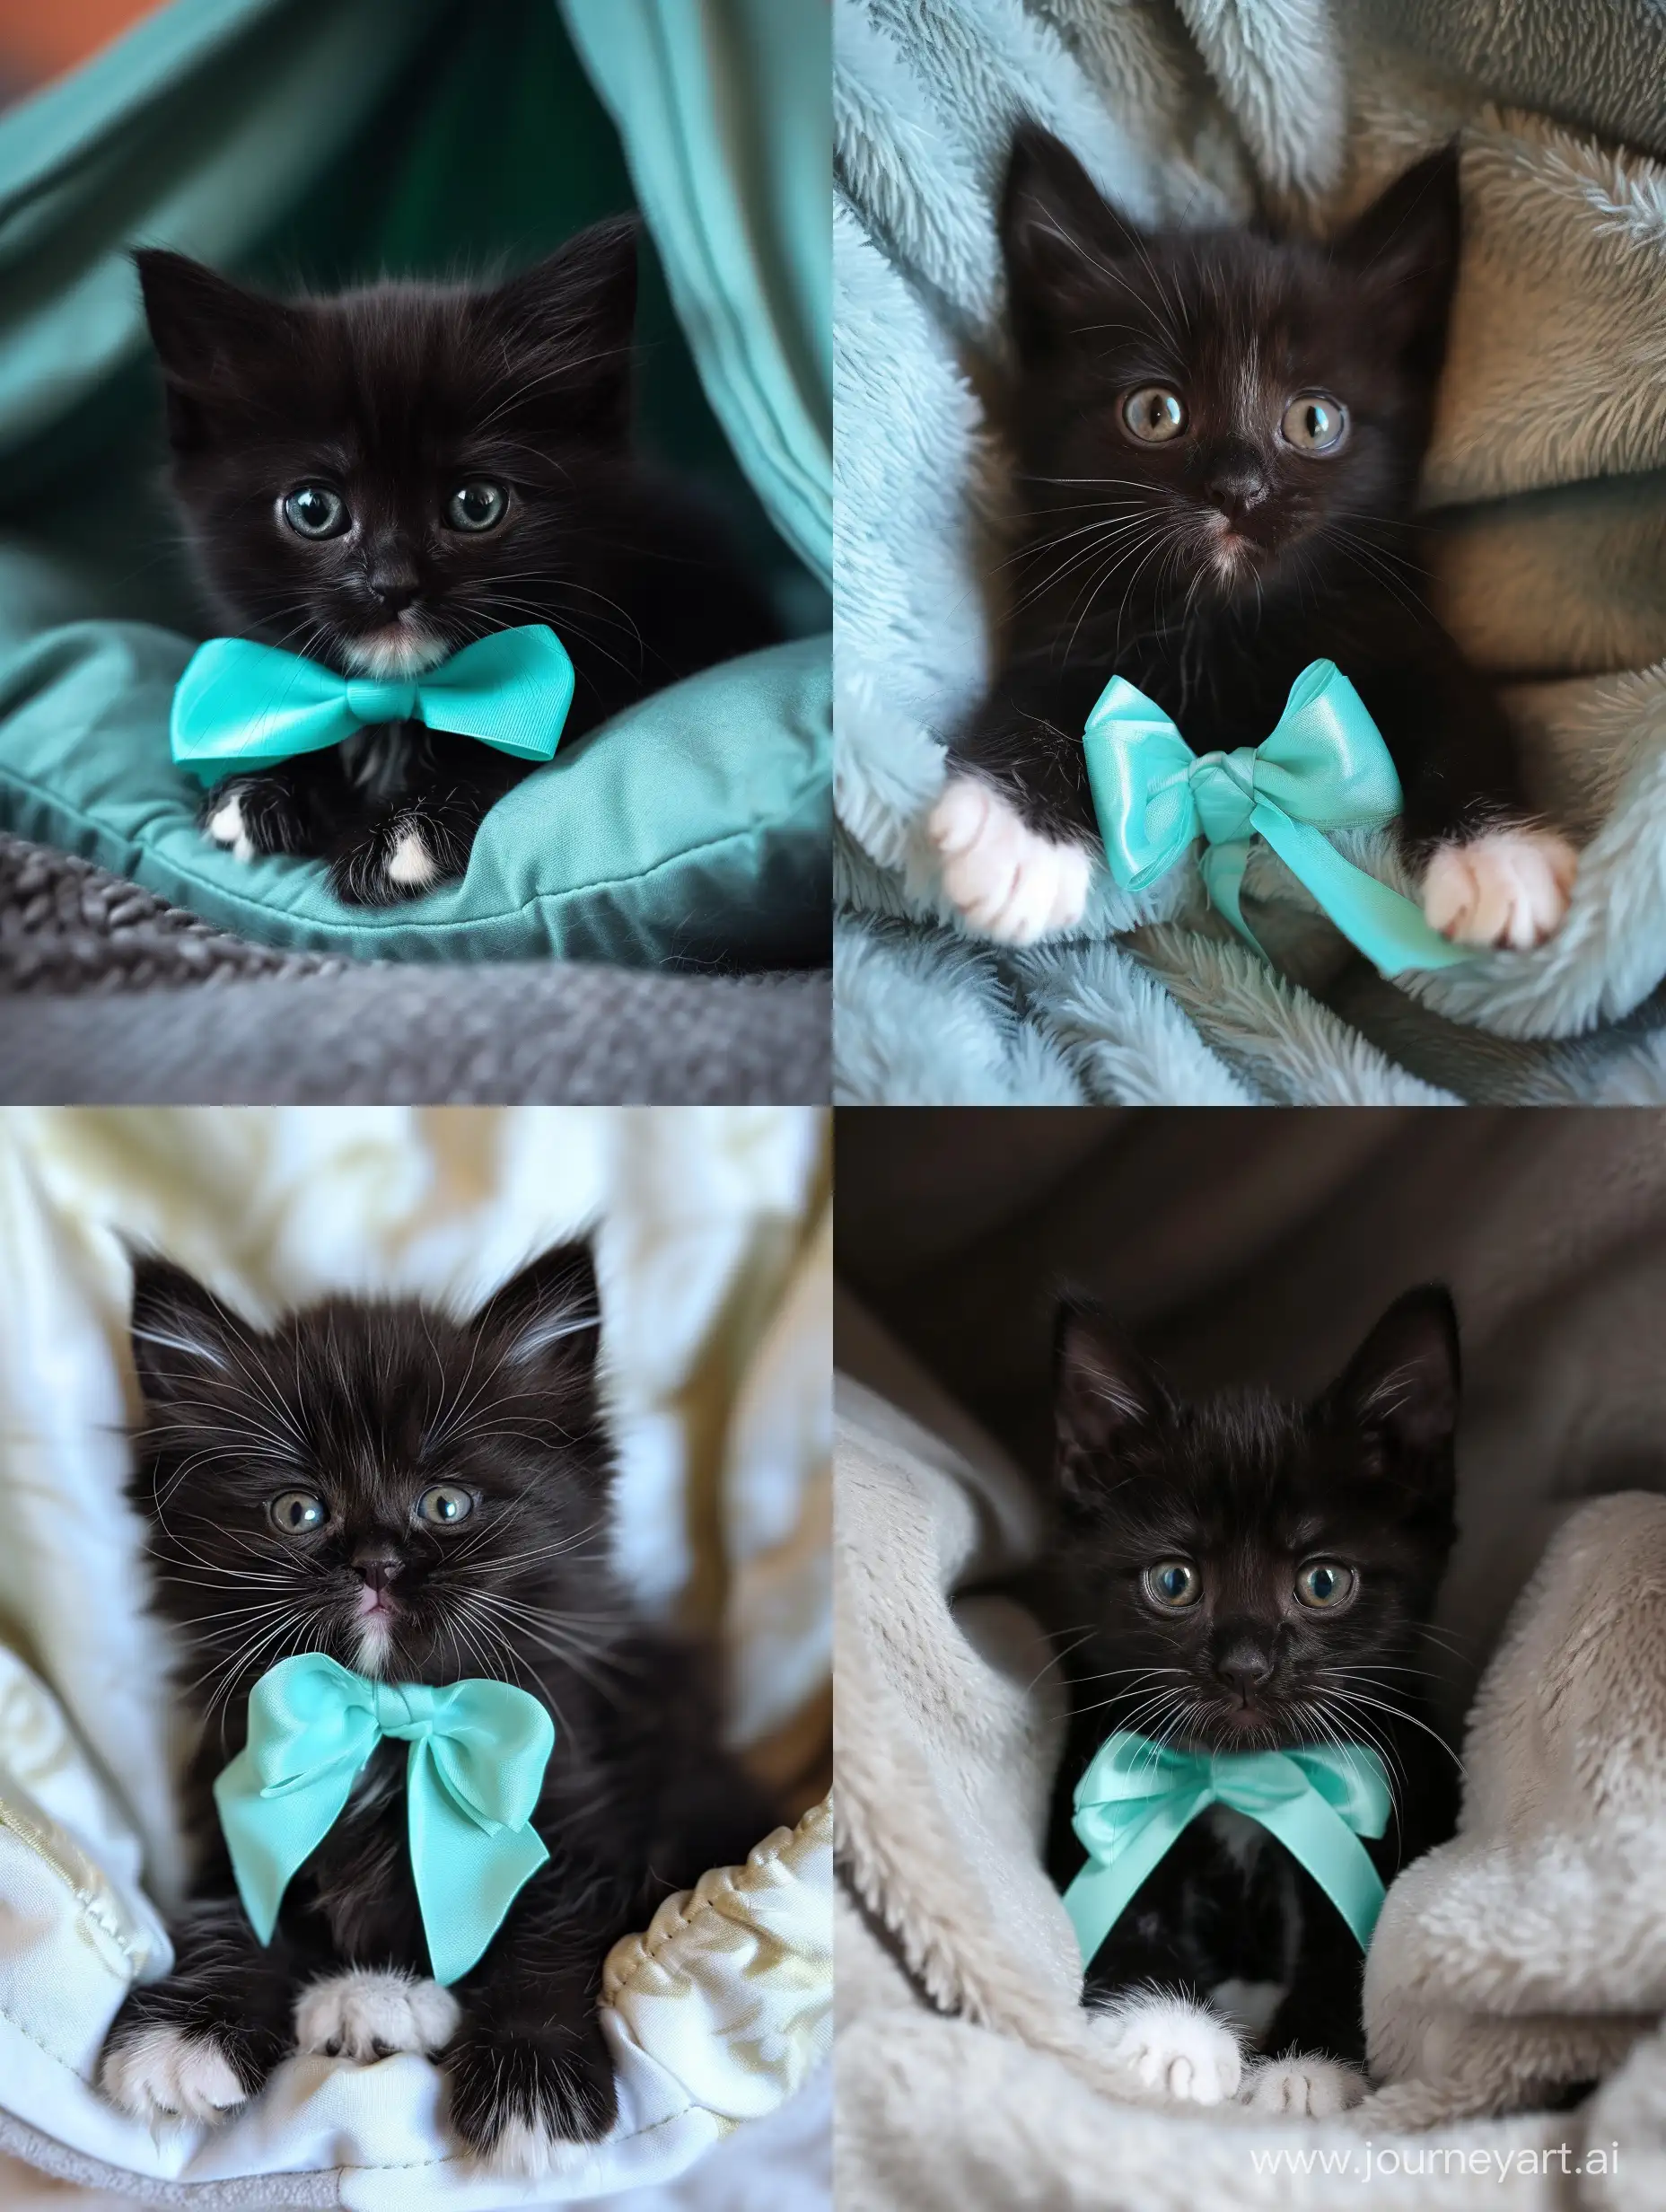 Adorable-TurquoiseBowed-Black-Kitten-Gazing-from-Cozy-Kitty-Cradle